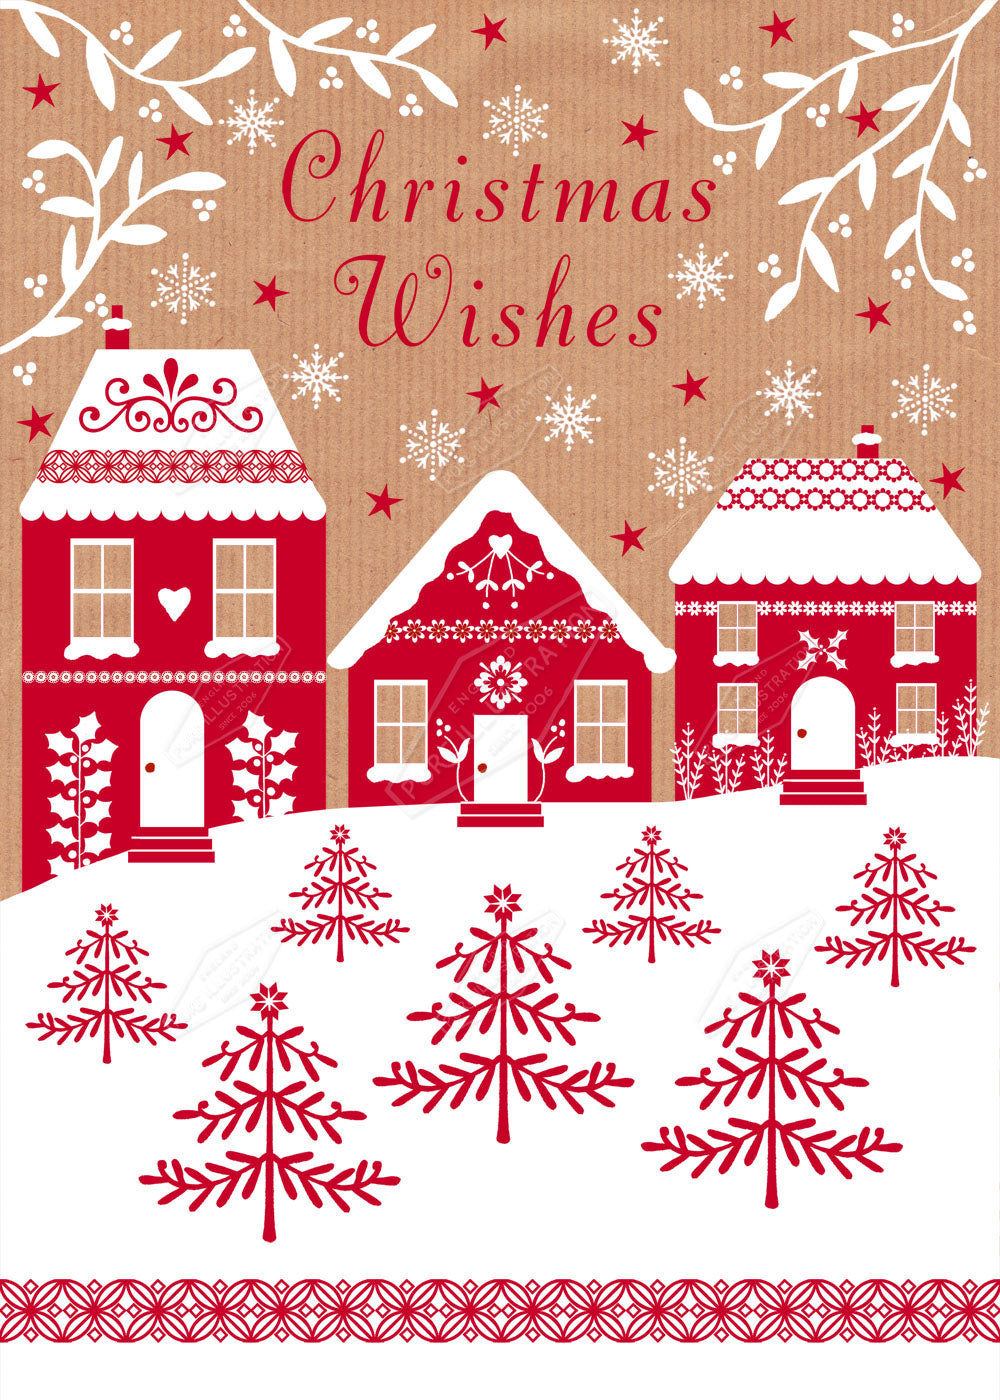 00021885SSNb- Sian Summerhayes is represented by Pure Art Licensing Agency - Christmas Greeting Card Design